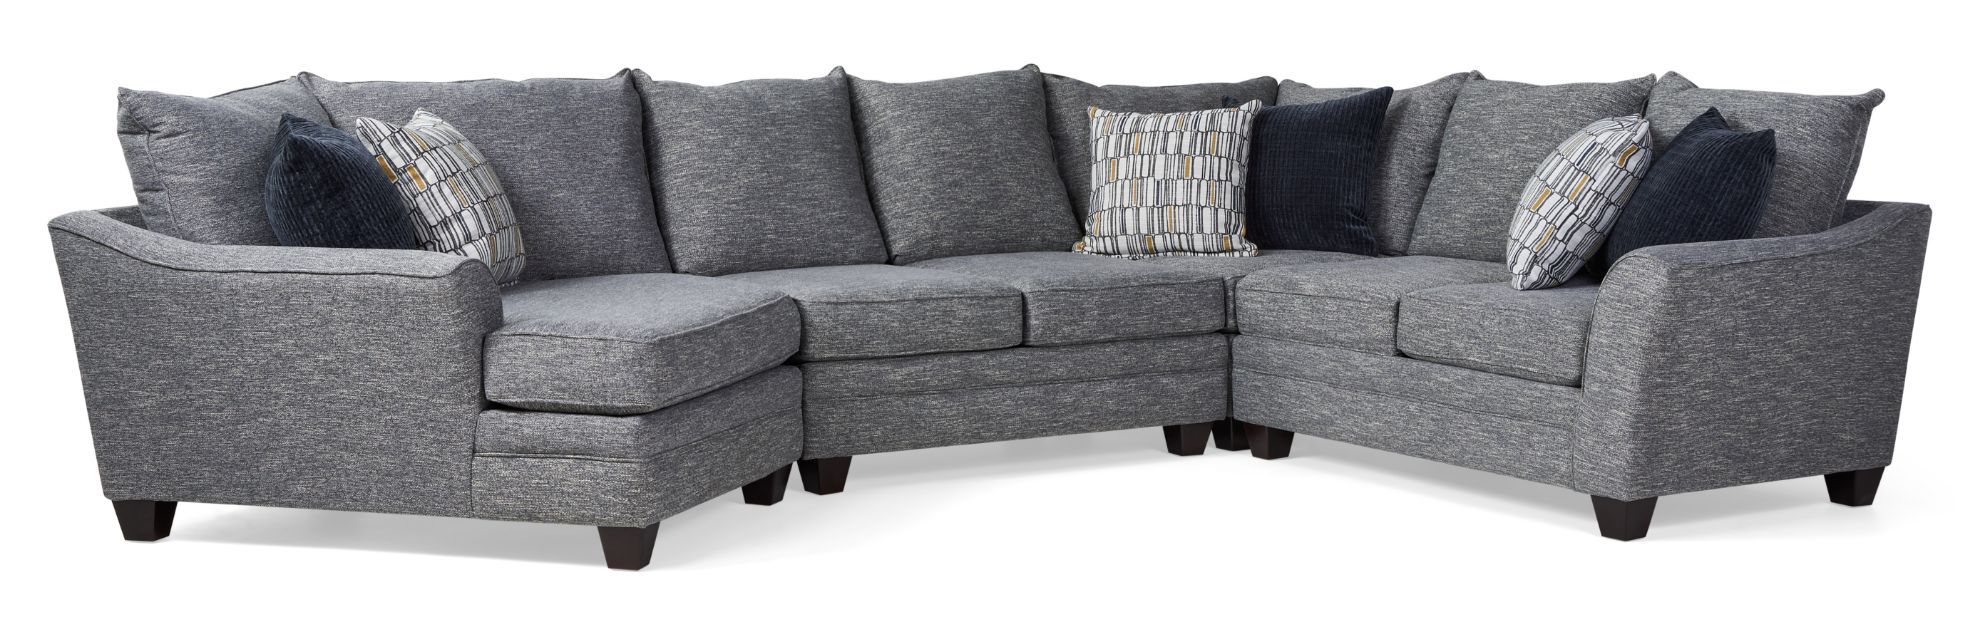 Paradox 4pc Sectional